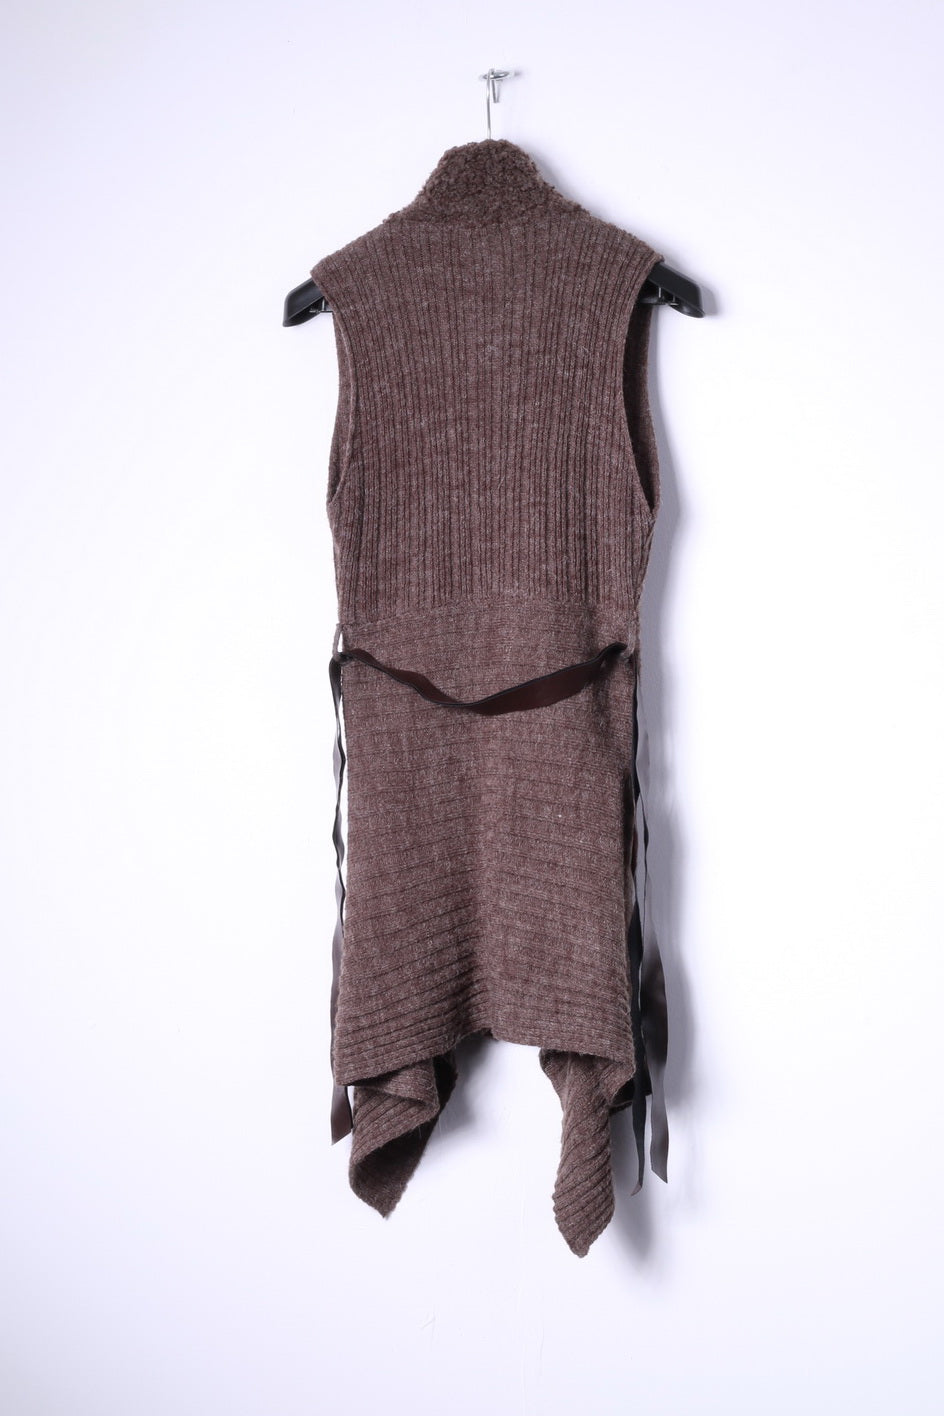 FLOYD by Smith Womens XL (M) Sweater Belted Brown Long Open Front Sleeveless Italy